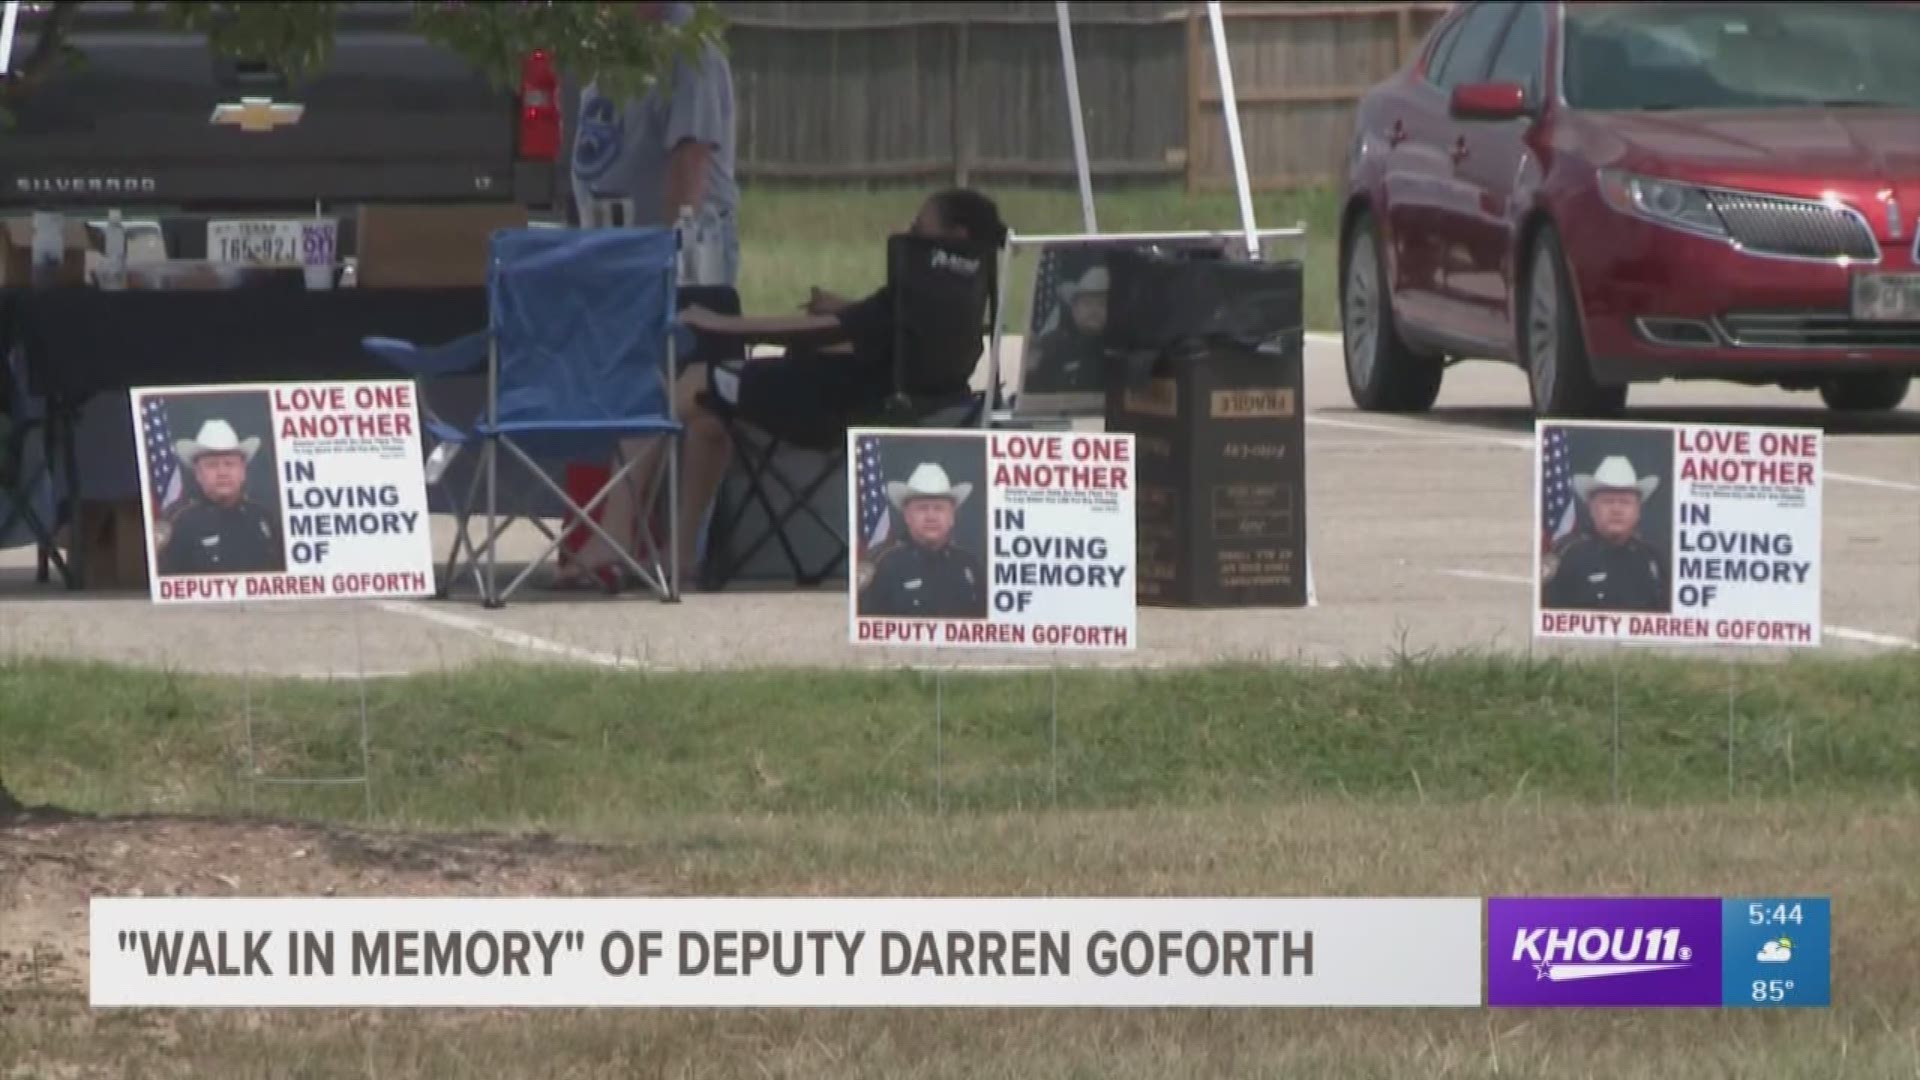 Dozens of people gathered Sunday to honor a Harris County deputy who was killed nearly three years ago.